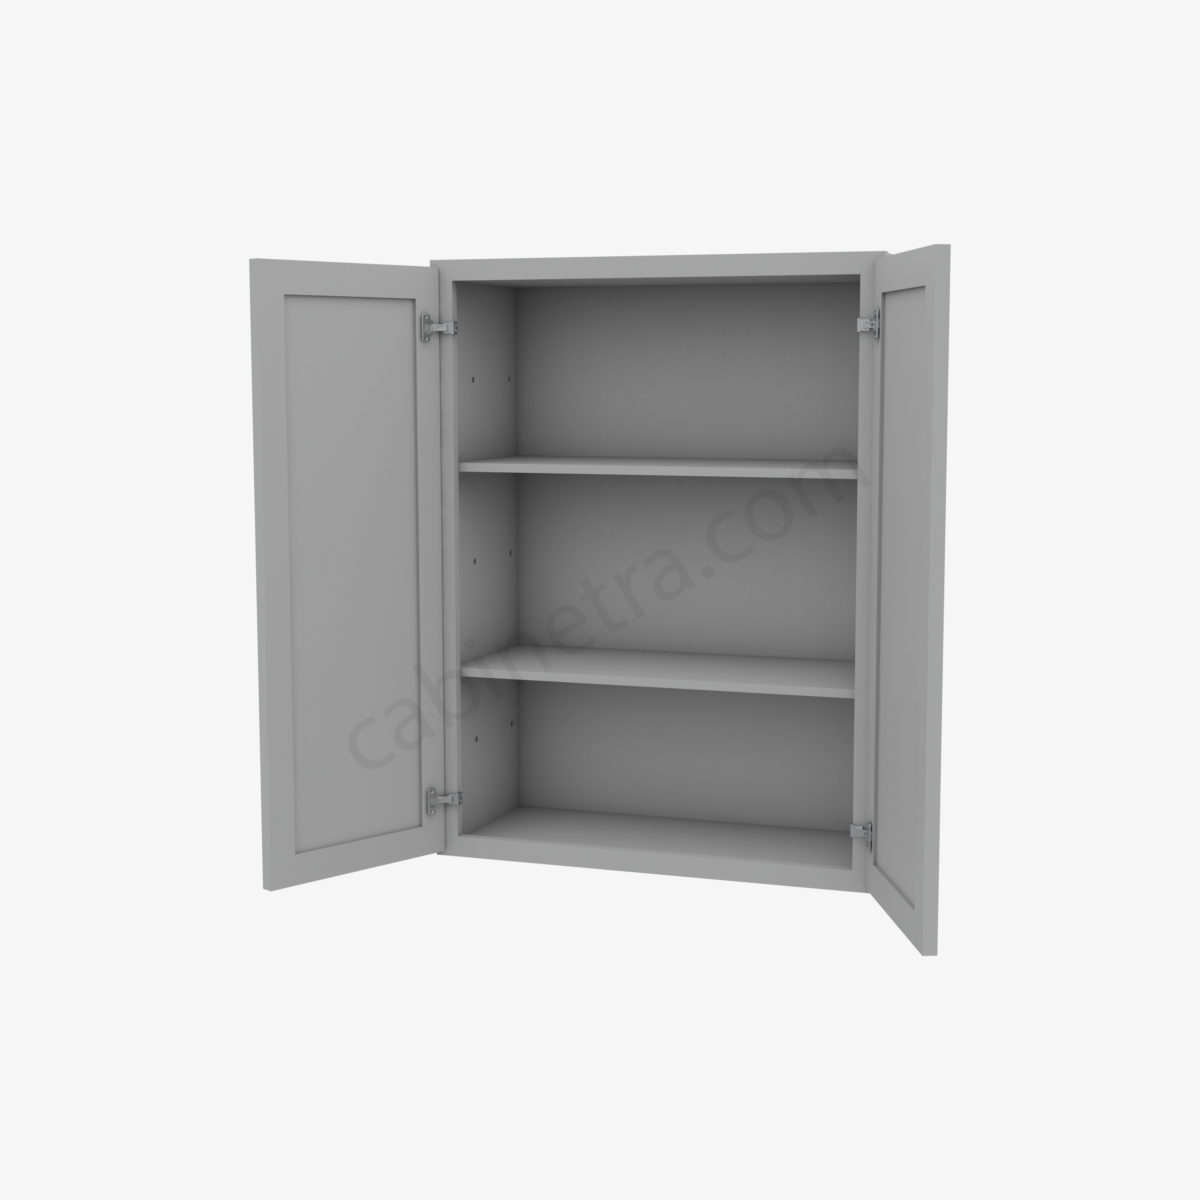 AB W2736B 5 Forevermark Lait Gray Shaker Cabinetra scaled